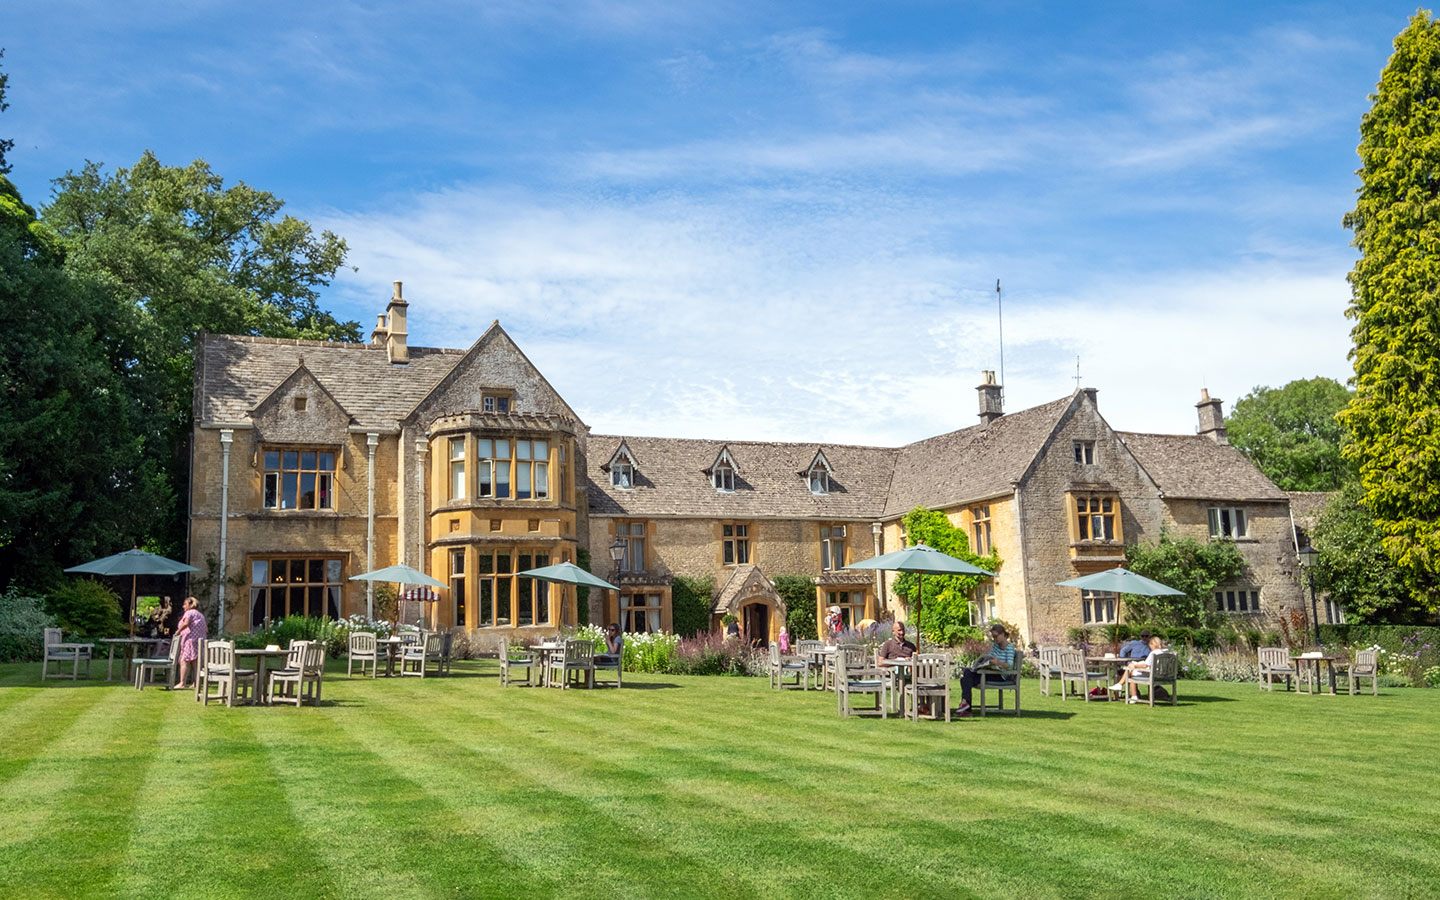 The The Lords of the Manor hotel in Upper Slaughter